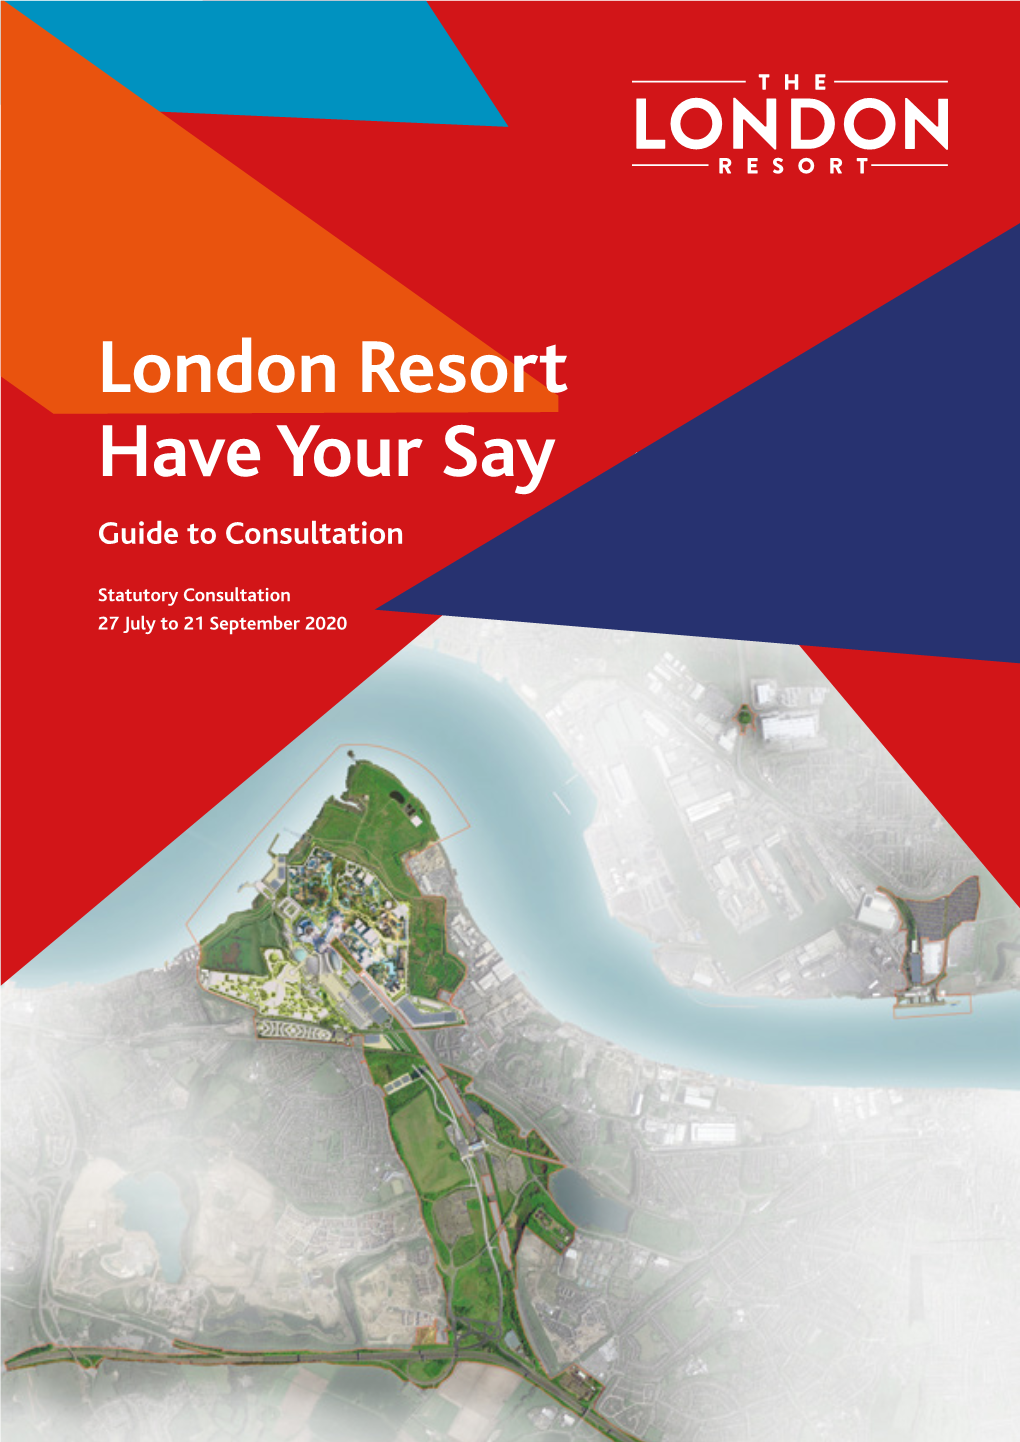 London Resort Guide to Consultation Welcome to the London Resort